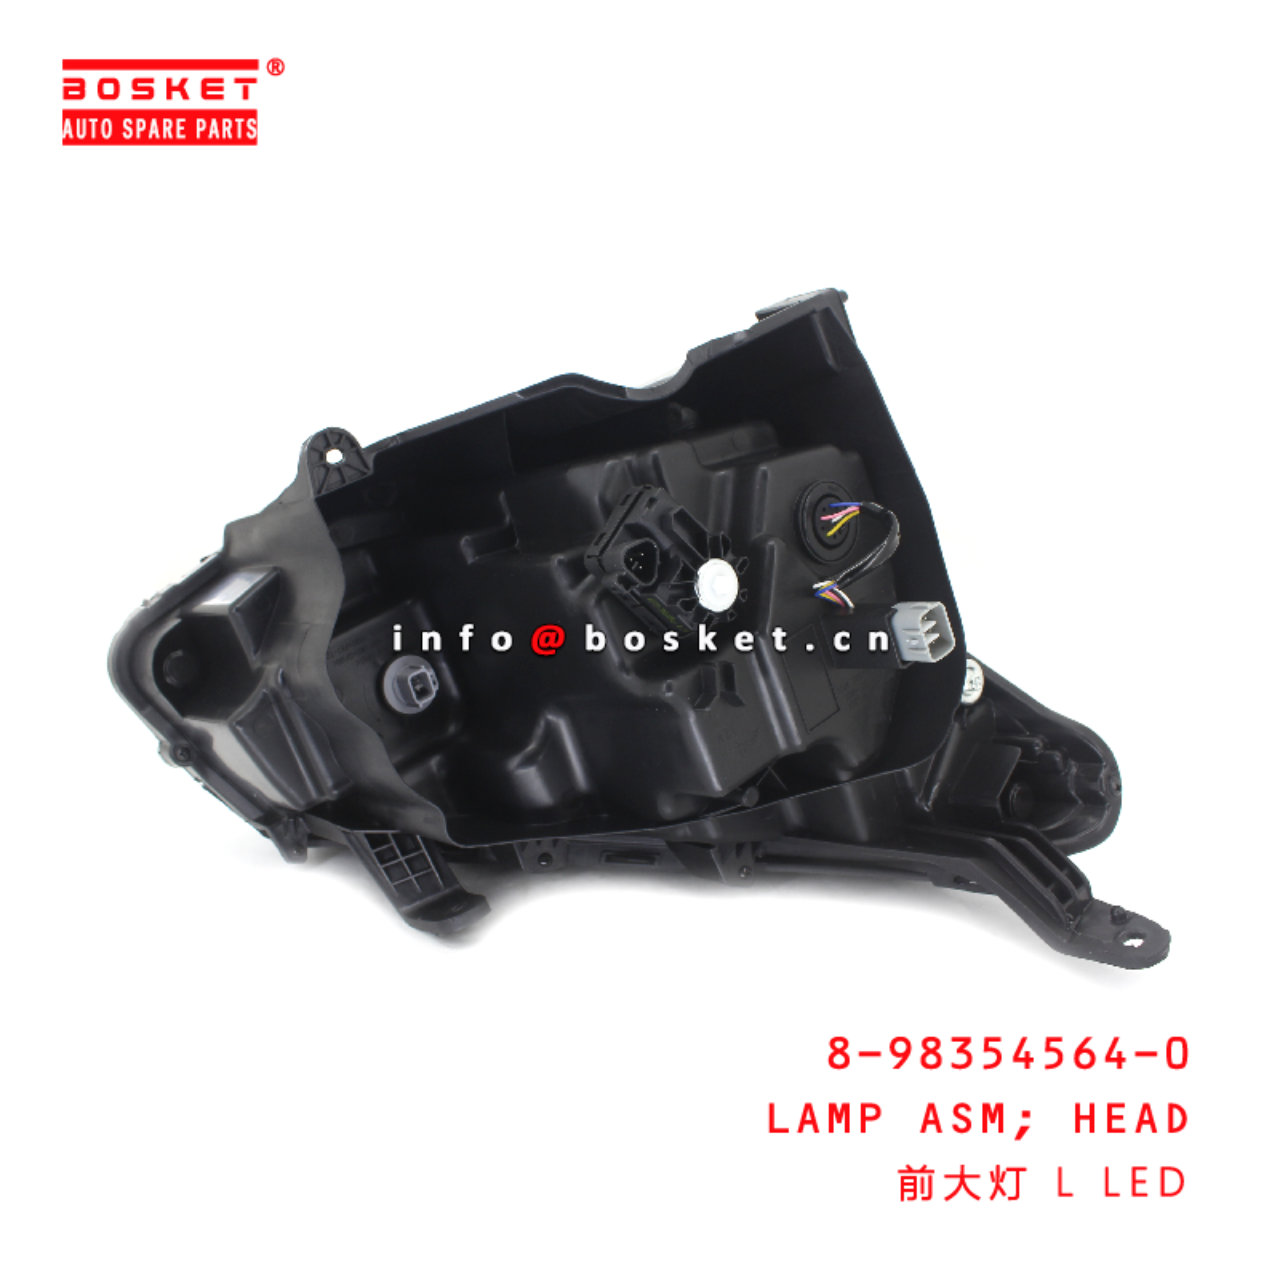 8-98354564-0 Head Lamp Assembly suitable for ISUZU DMAX2019 